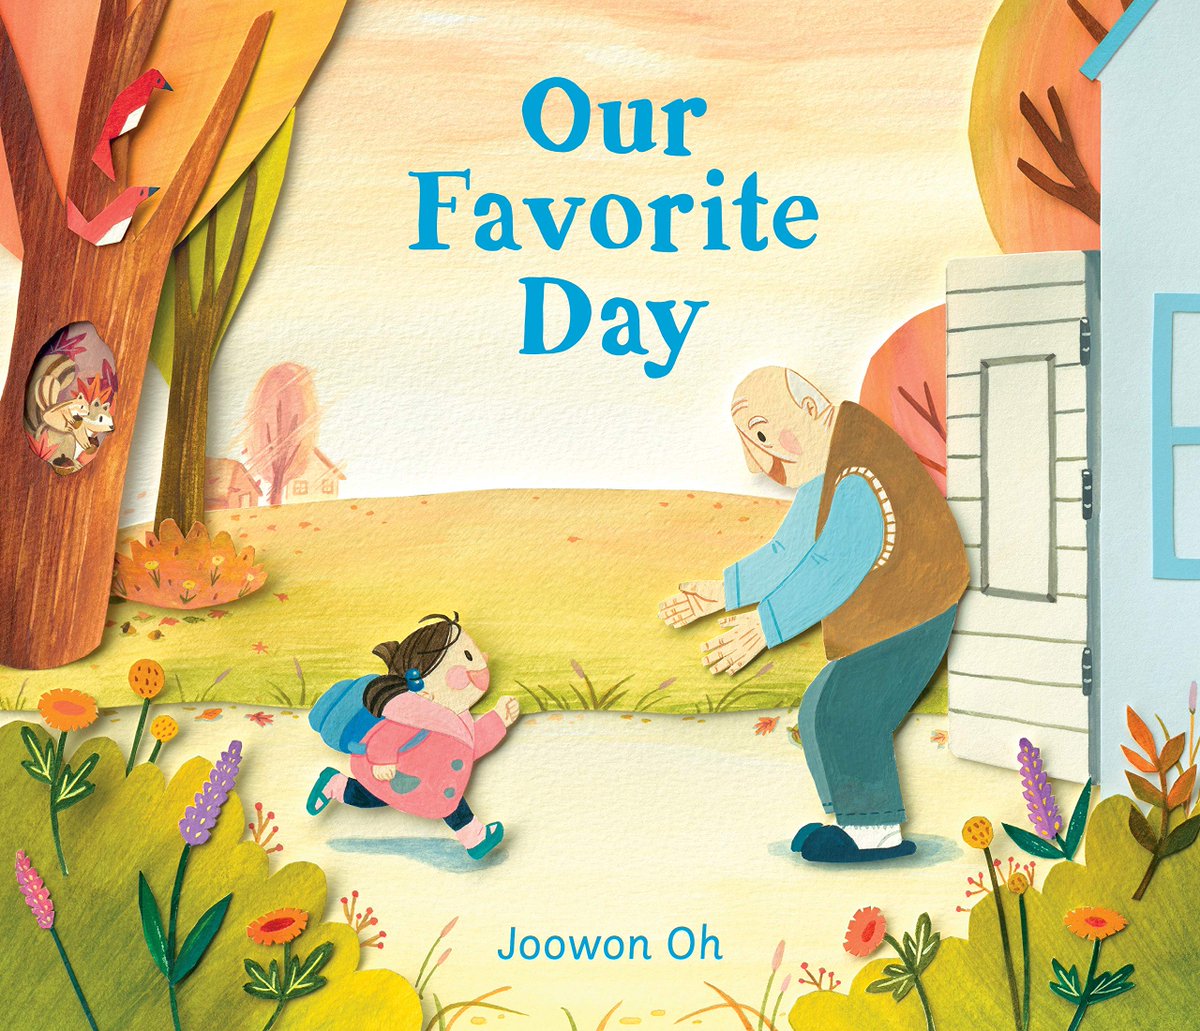 As we continue in AAPI month, we want to give you all stories that revolve around Asian American and Pacific Islander characters. Today we recommend reading Our Favorite Day, written by Joowon Oh. Happy reading! #AAPImonth #rorgny #reachoutandreadgny #childrensbooks